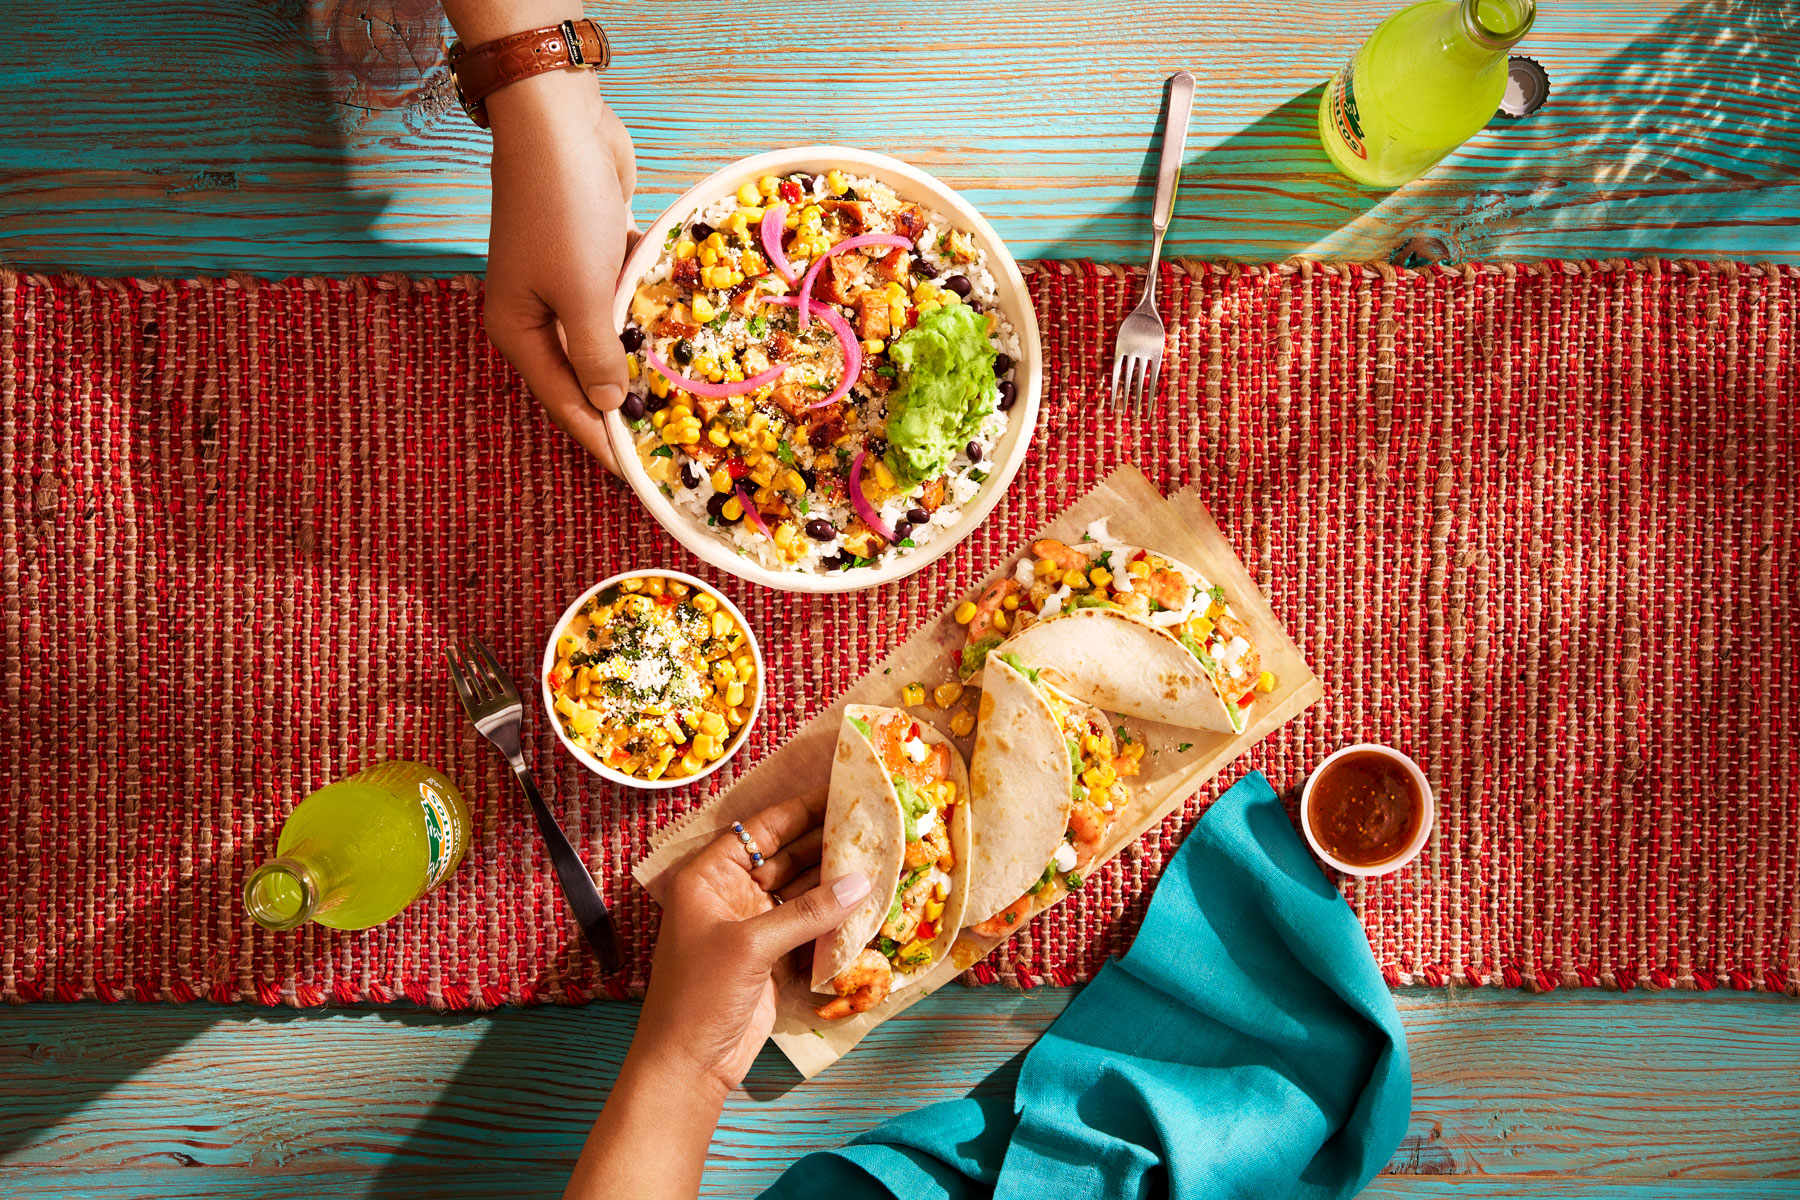 Mexican Steet Corn, featuring a warm blend of sweet corn, poblano chiles, red bell peppers, creamy elote sauce and lime juice. Add to your entrée for no additional charge. Order today at QDOBA Mexican Eats.